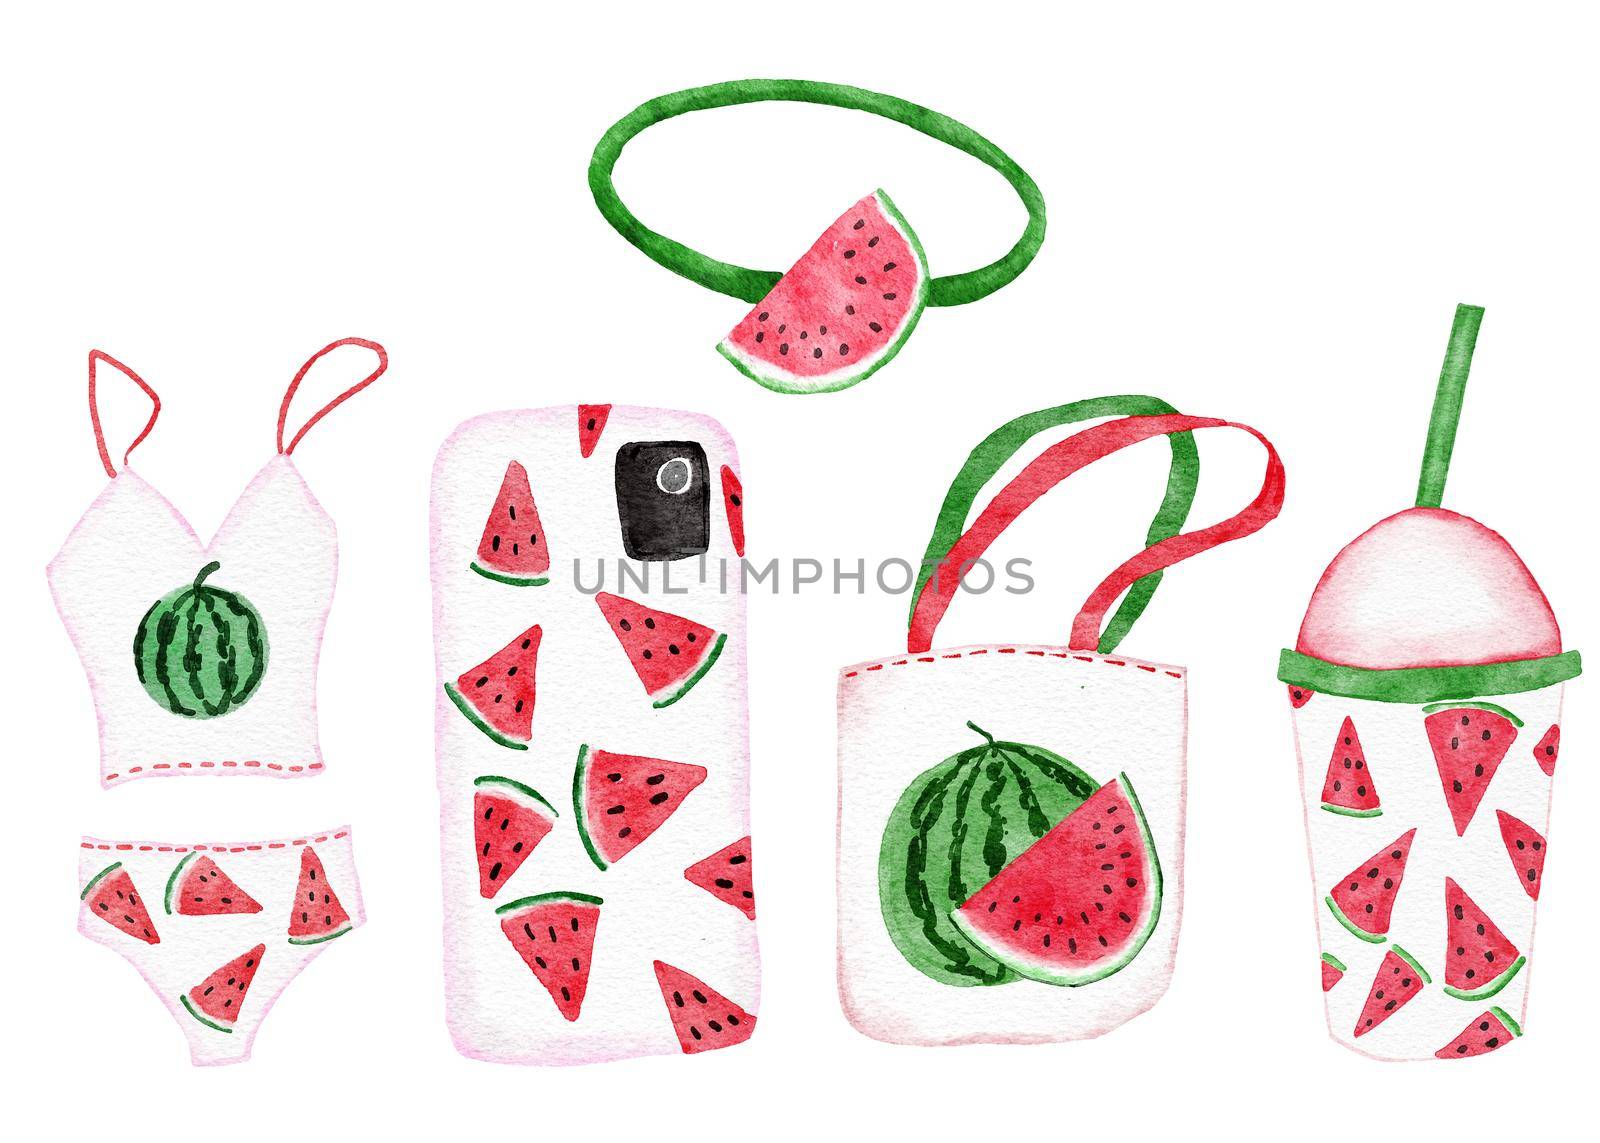 Watercolor hand drawn objects with watermelon summer print, red green swimsuit swimwear, funner phone case, tote bag, tumbler. Girly fashion for holiday vacation design. Bright cute kawaii print